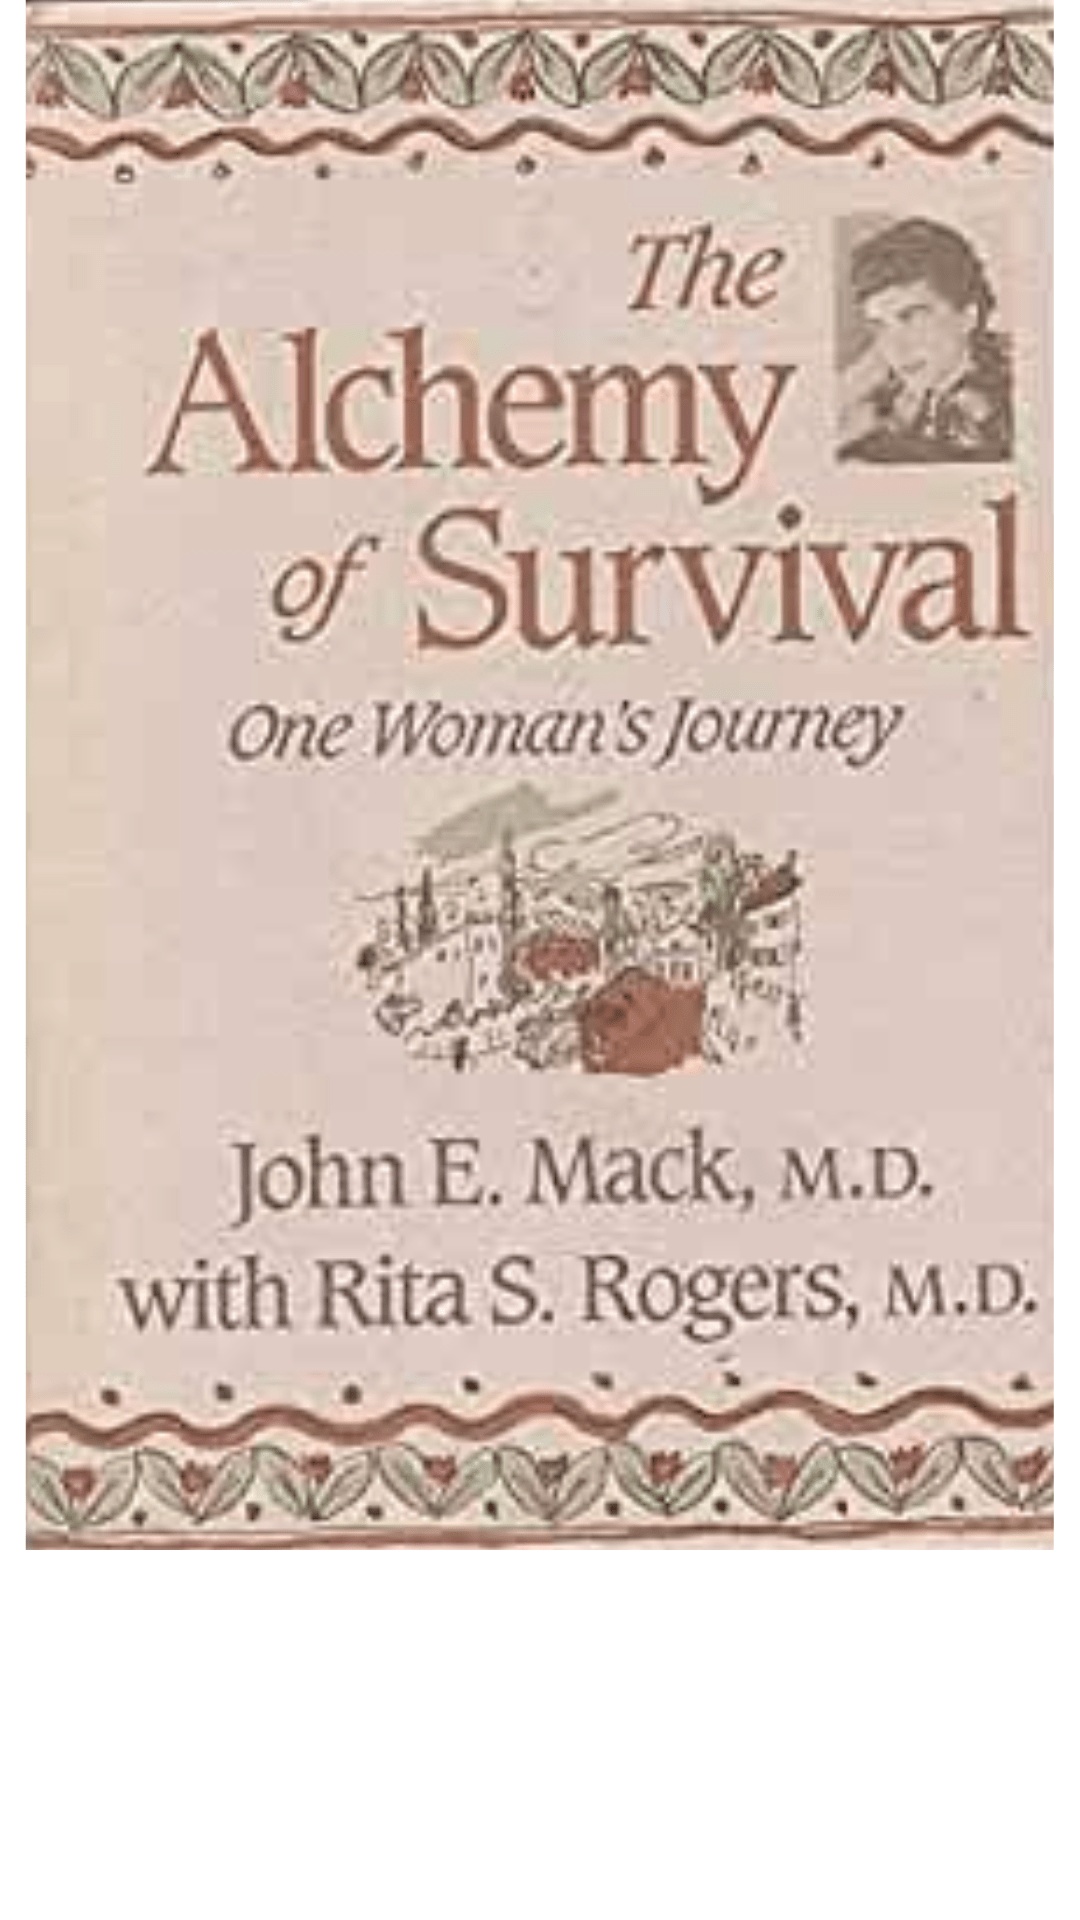 The Alchemy of Survival: One Woman's Journey